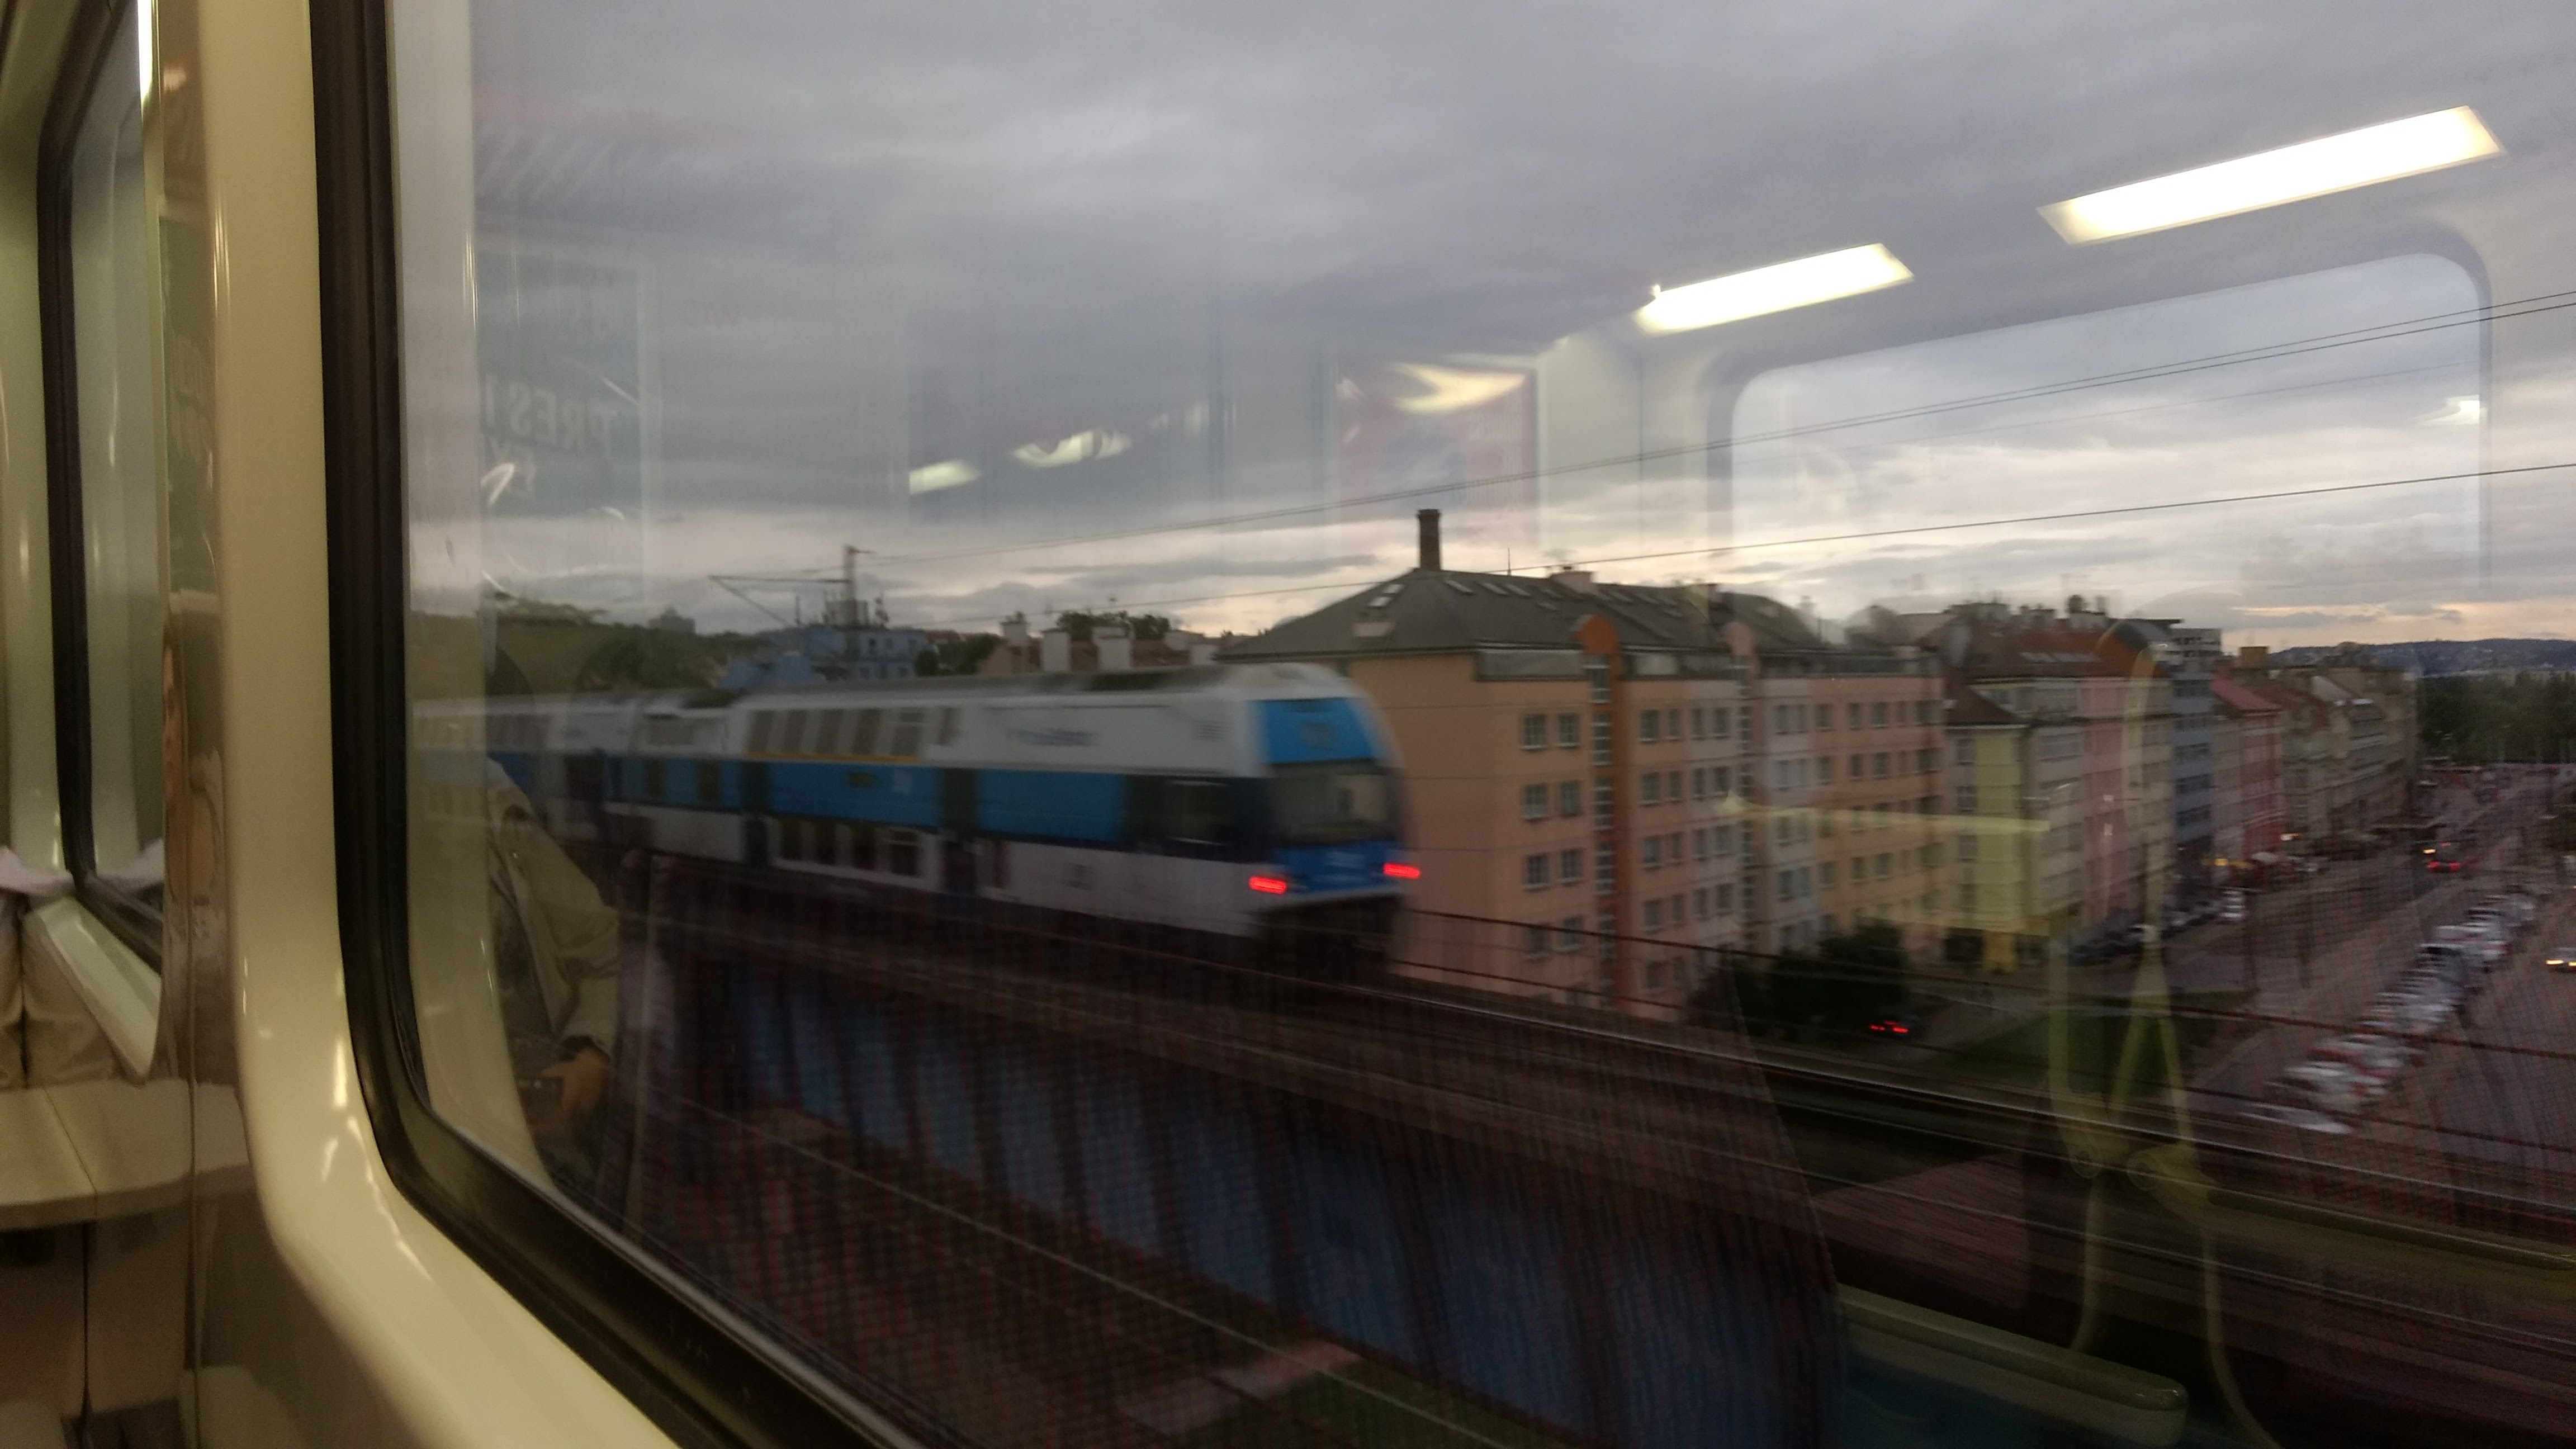 471 class EMU on a bridge over Na Žertvách street, pictured through a window of another train passing on the other track.